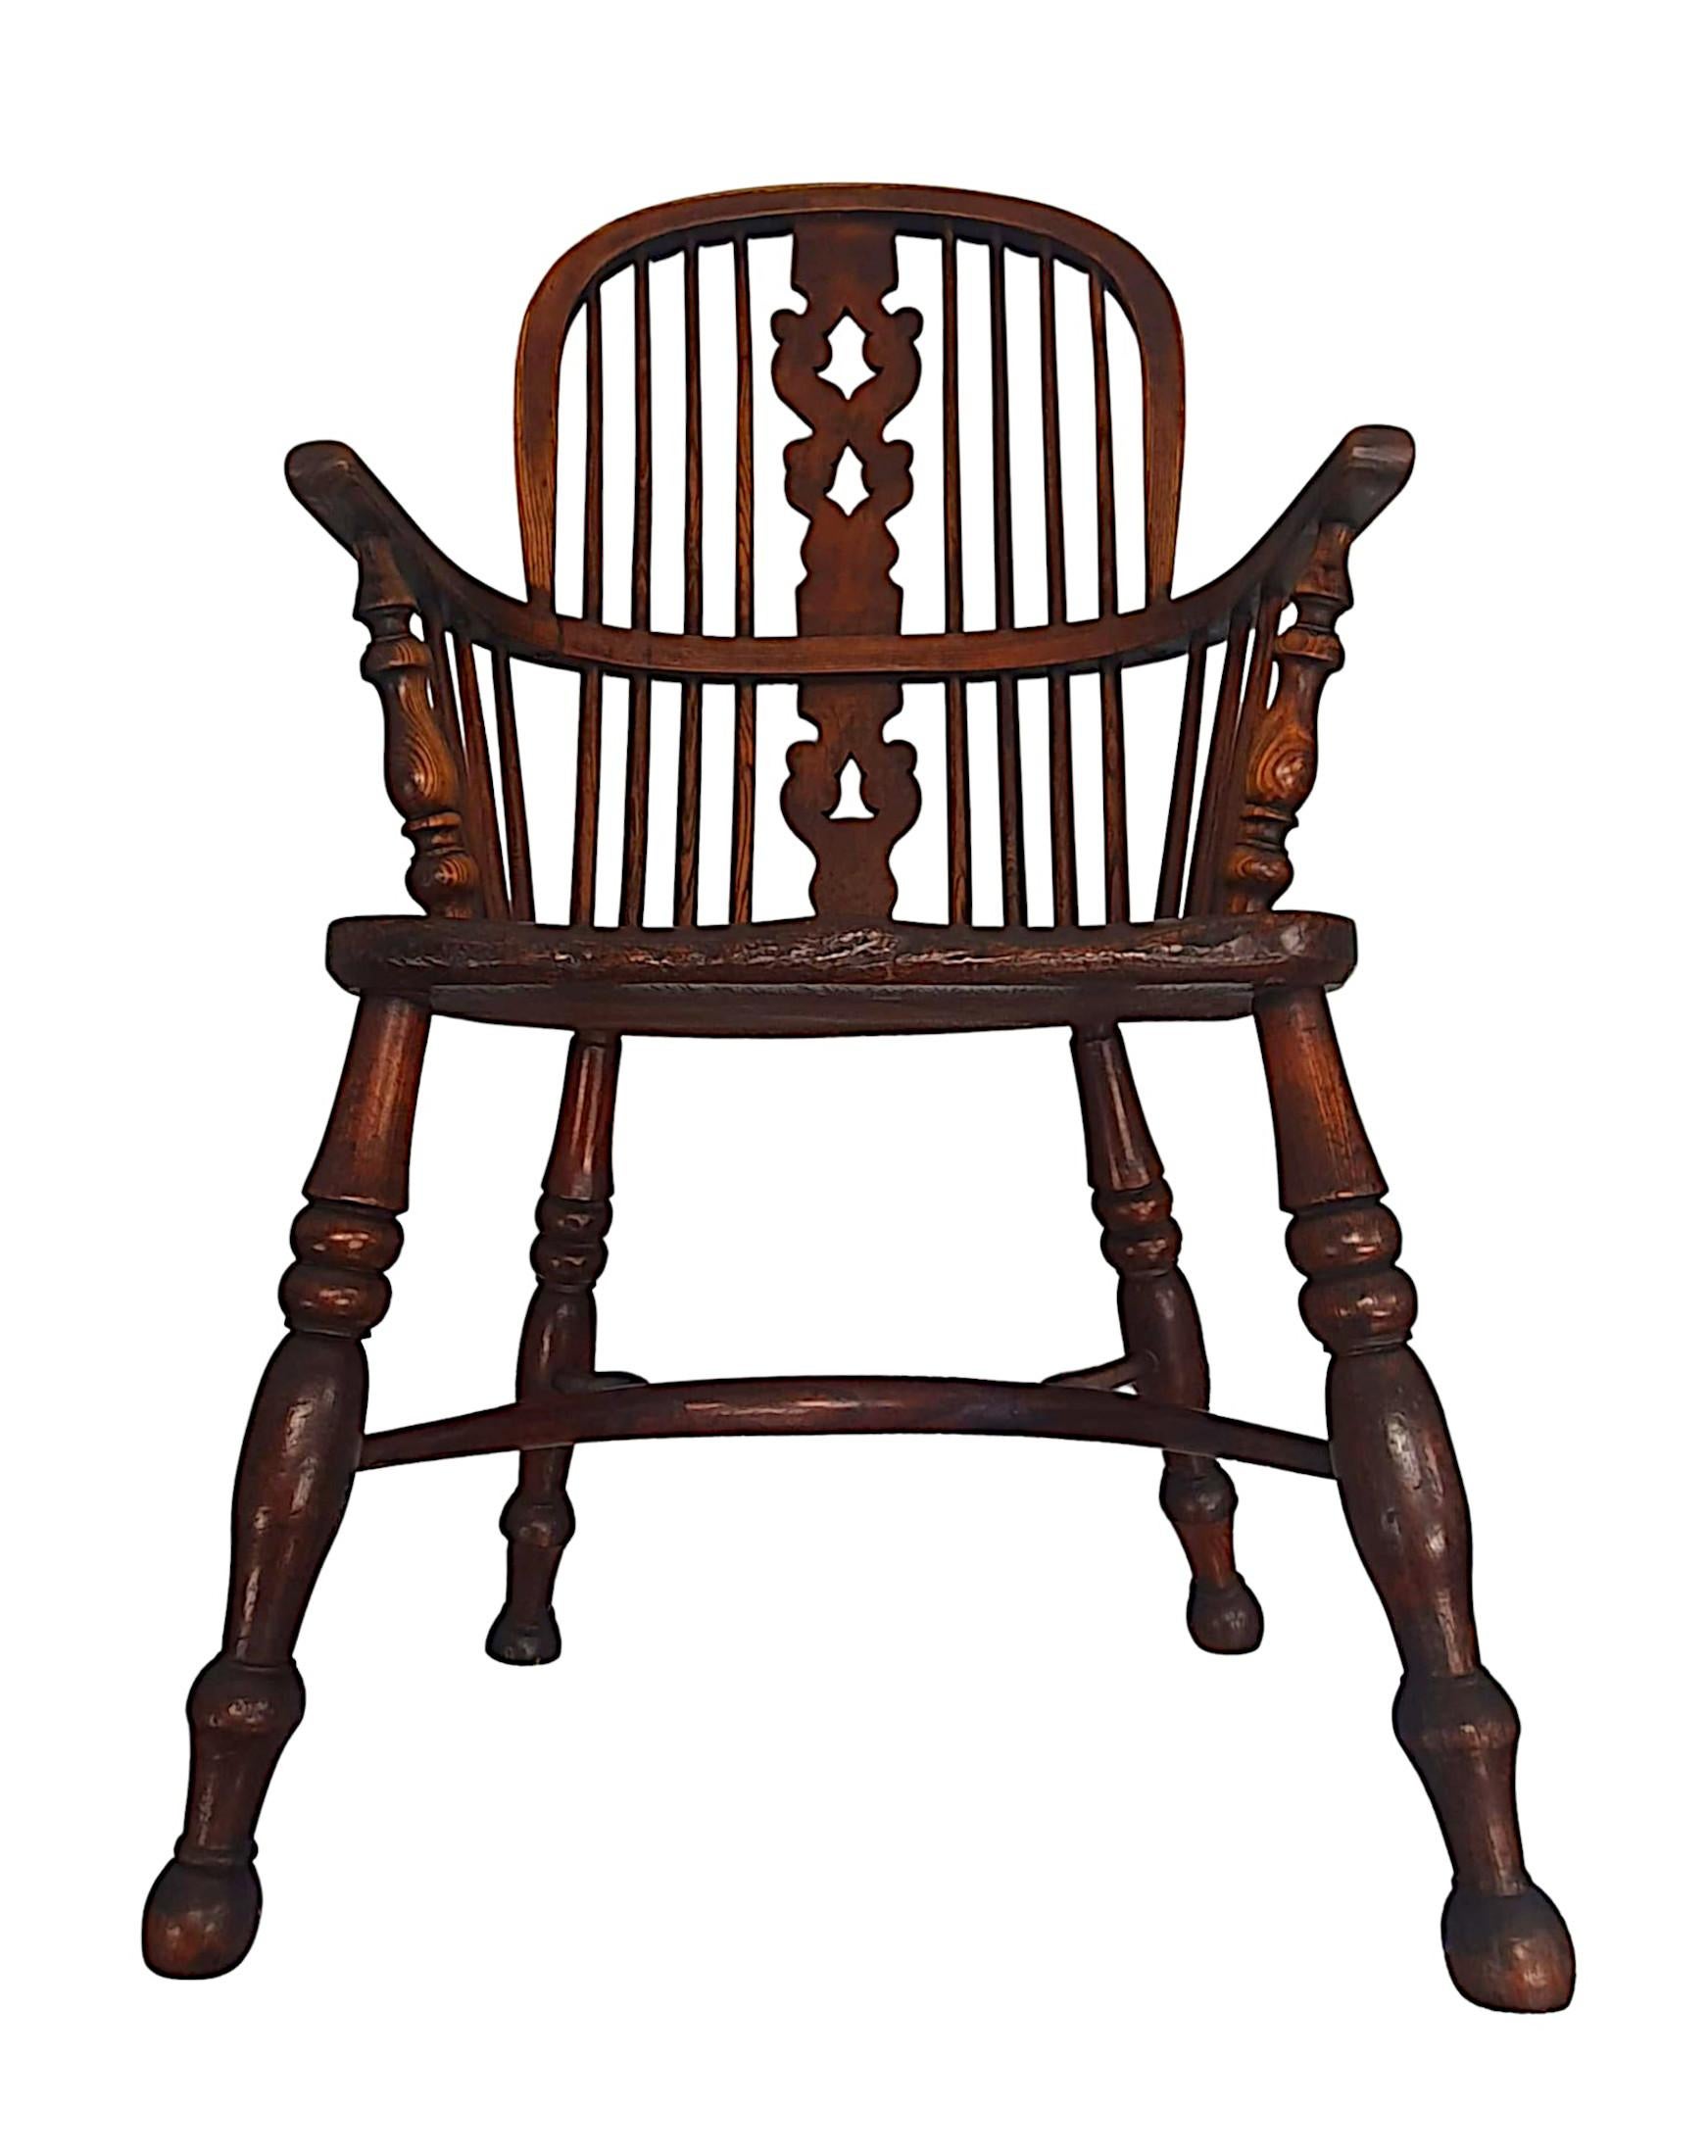 Very Rare and Fine 19th Century High Back Windsor Armchair For Sale 1